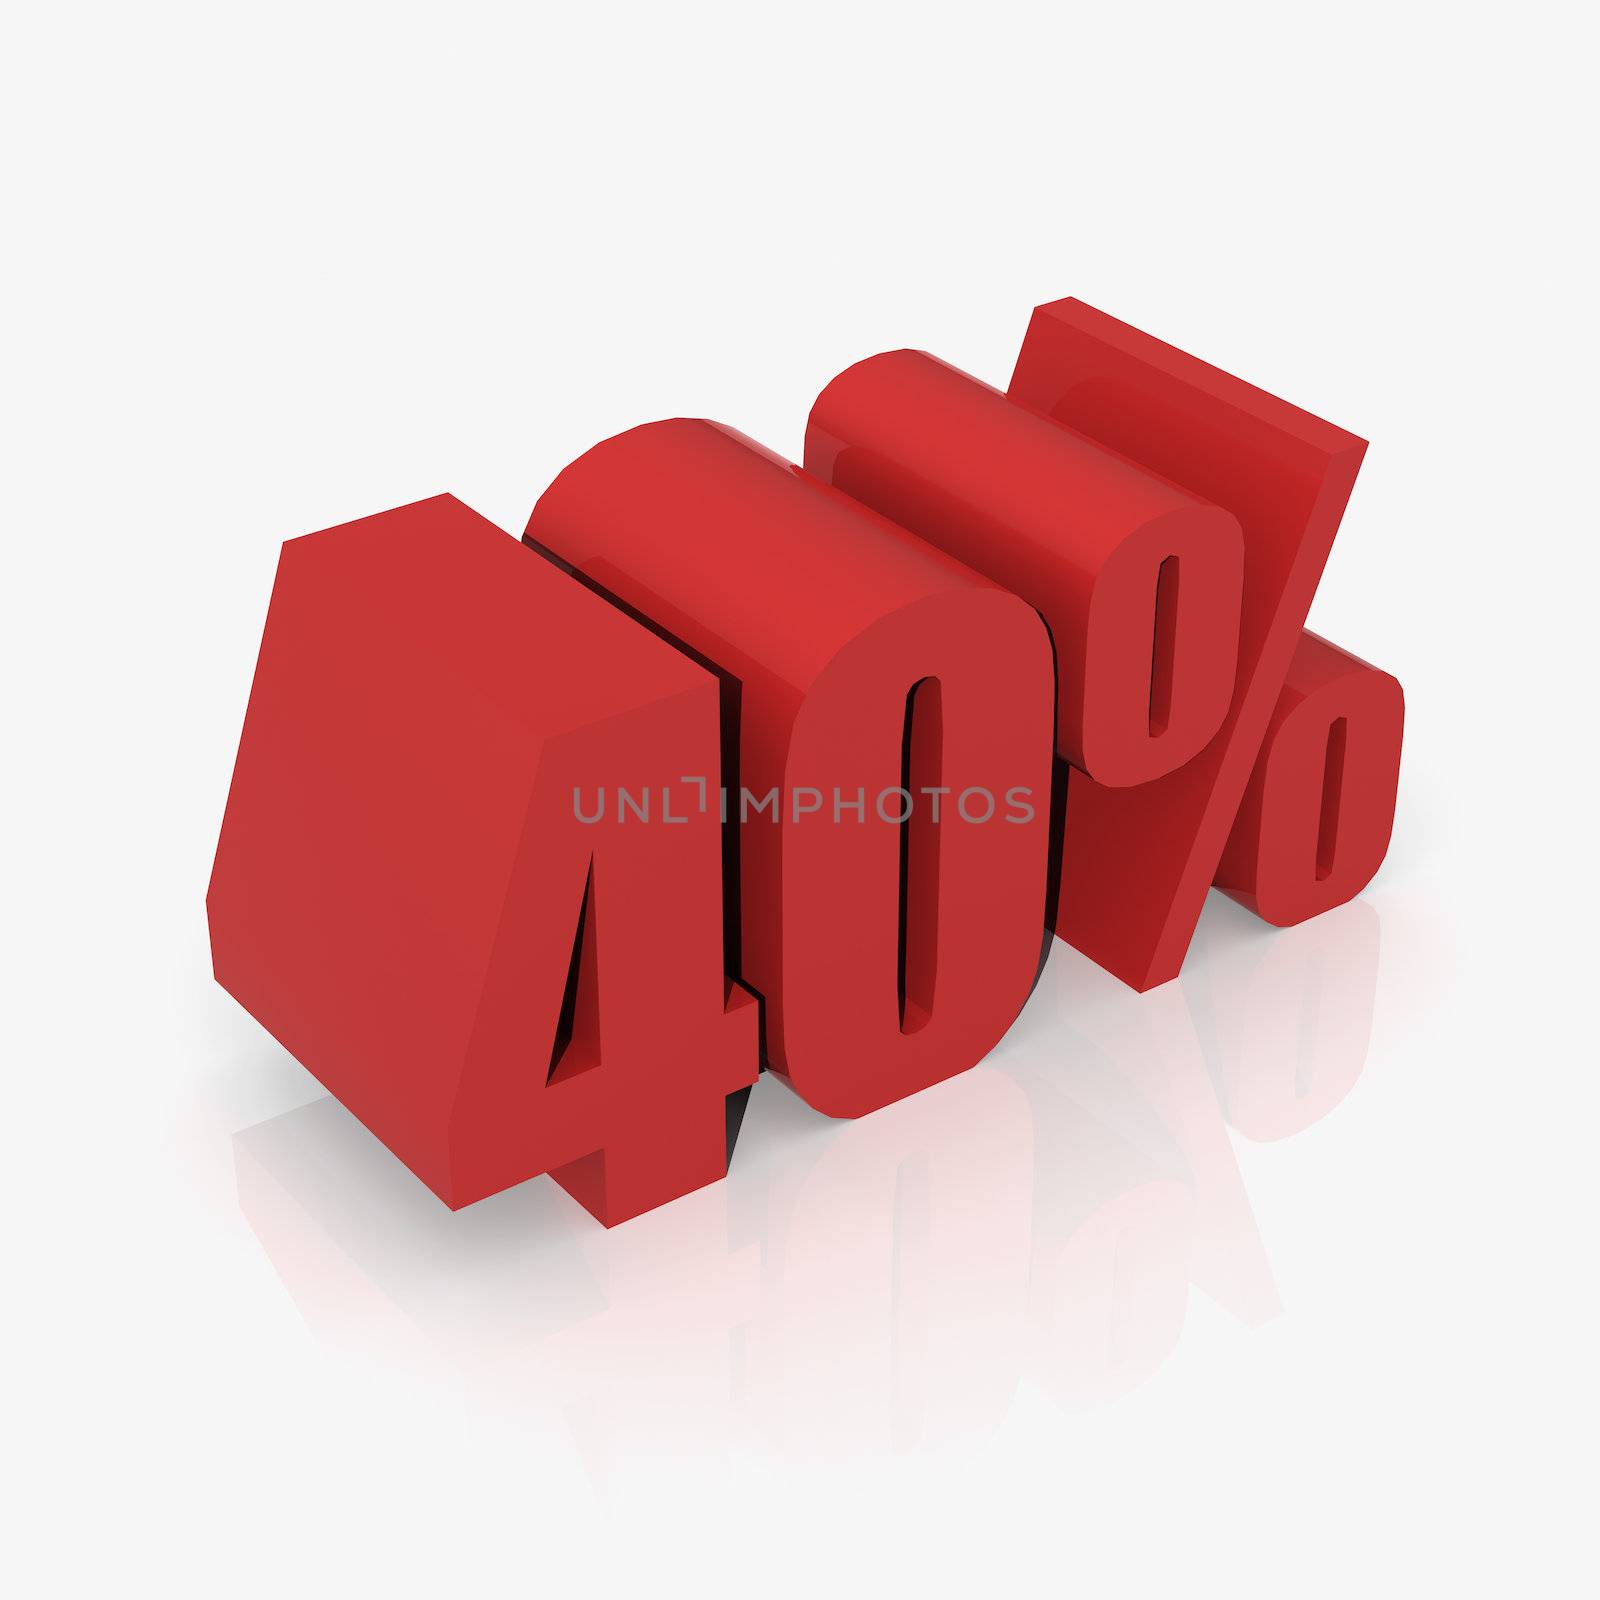 3D rendering of a 40 percent discount in red letters on a white background 